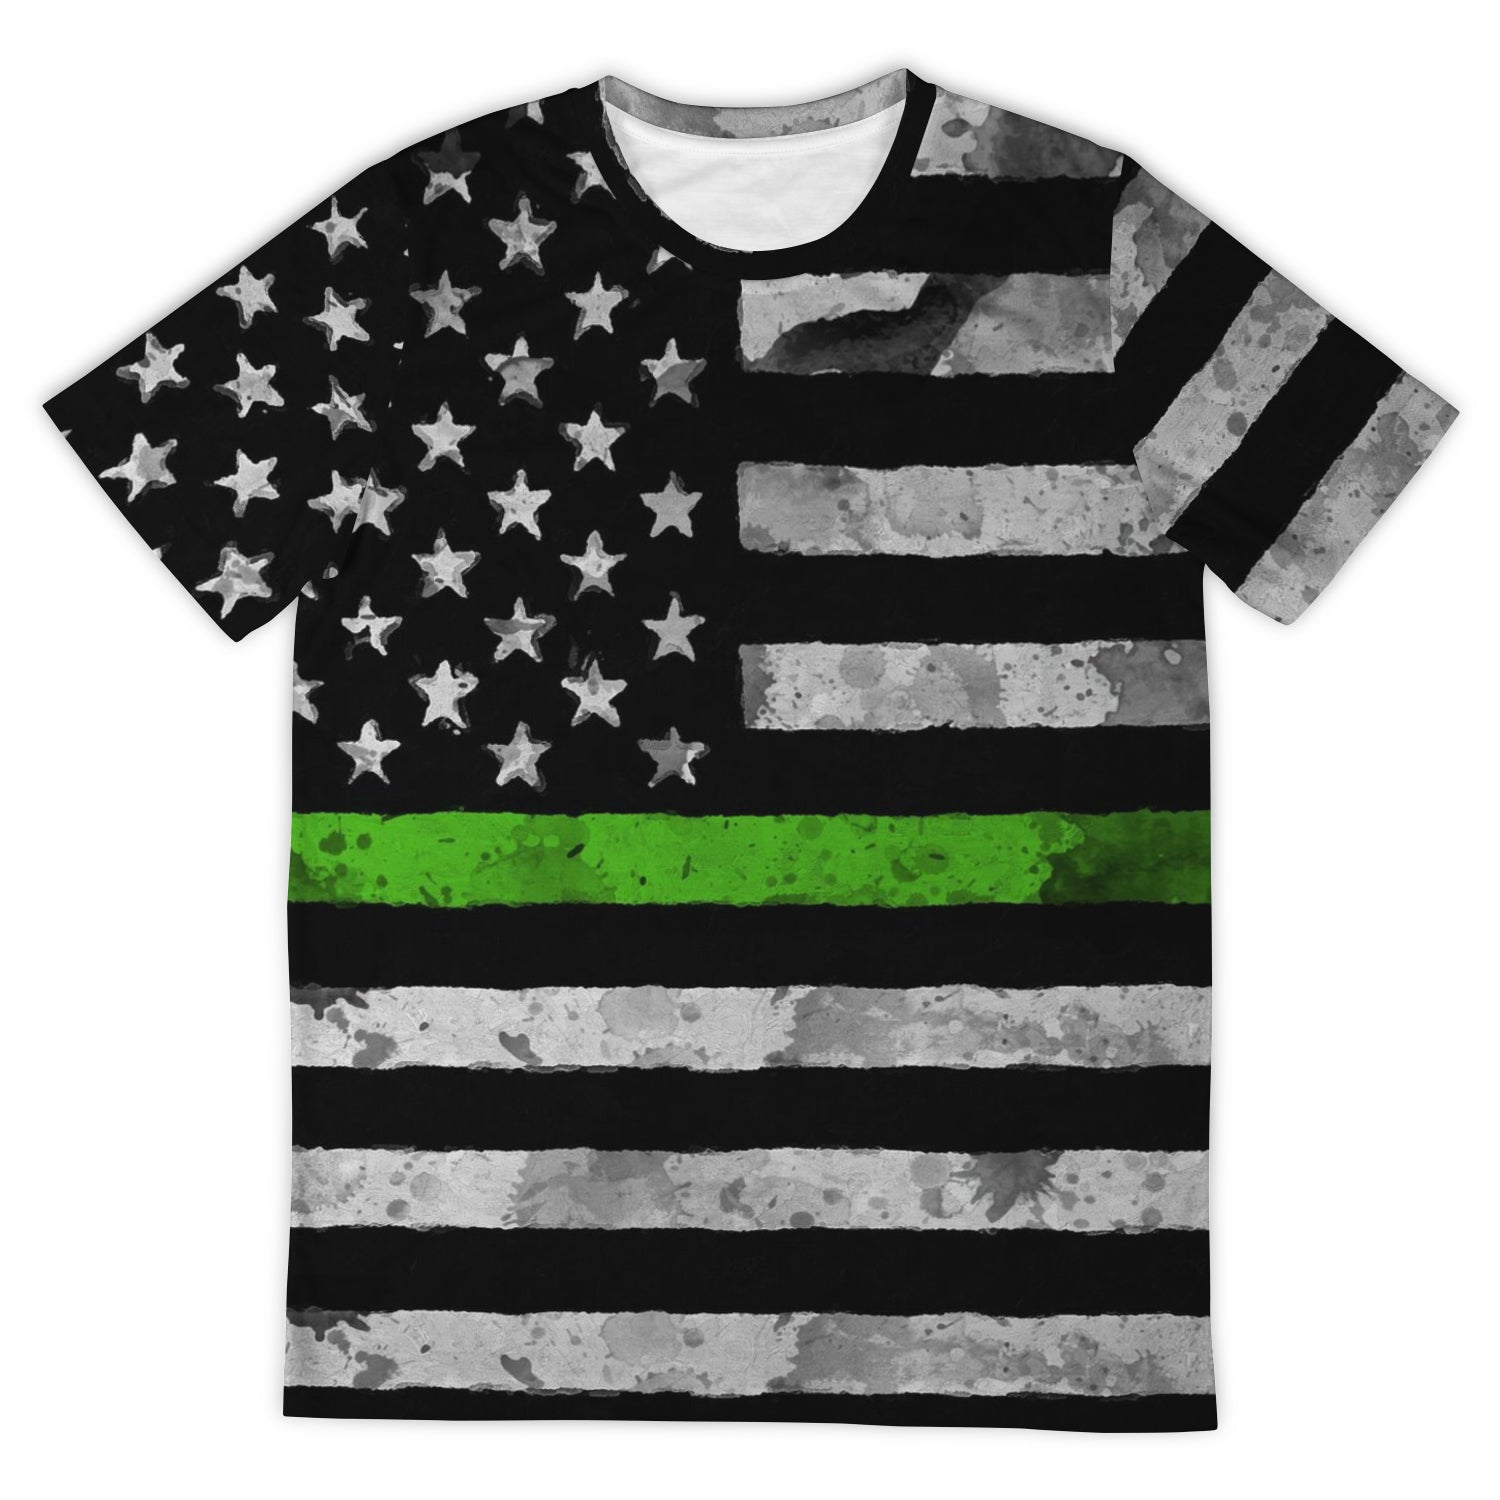 Then Green Line All Over Print Shirt